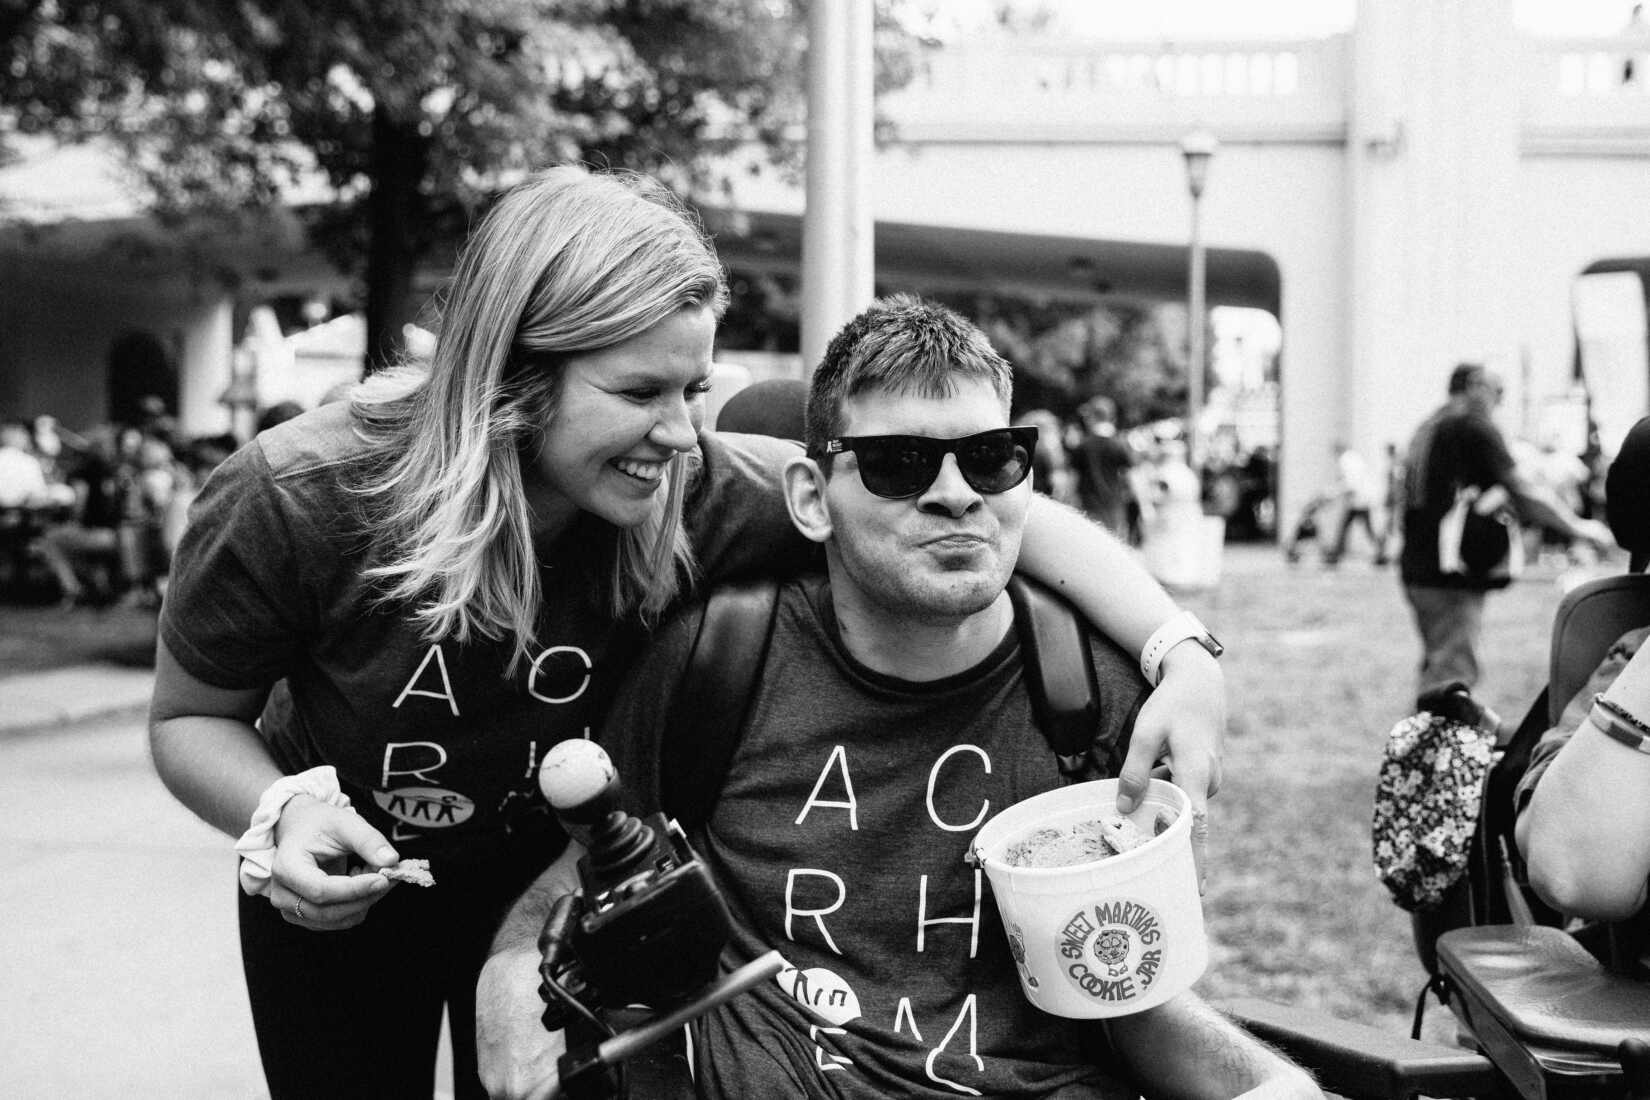 ACR Homes Direct Care Professional is providing care to a person with disabilities at the Minnesota State Fair, an activity that promotes disability inclusion and wheelchair accessibility.